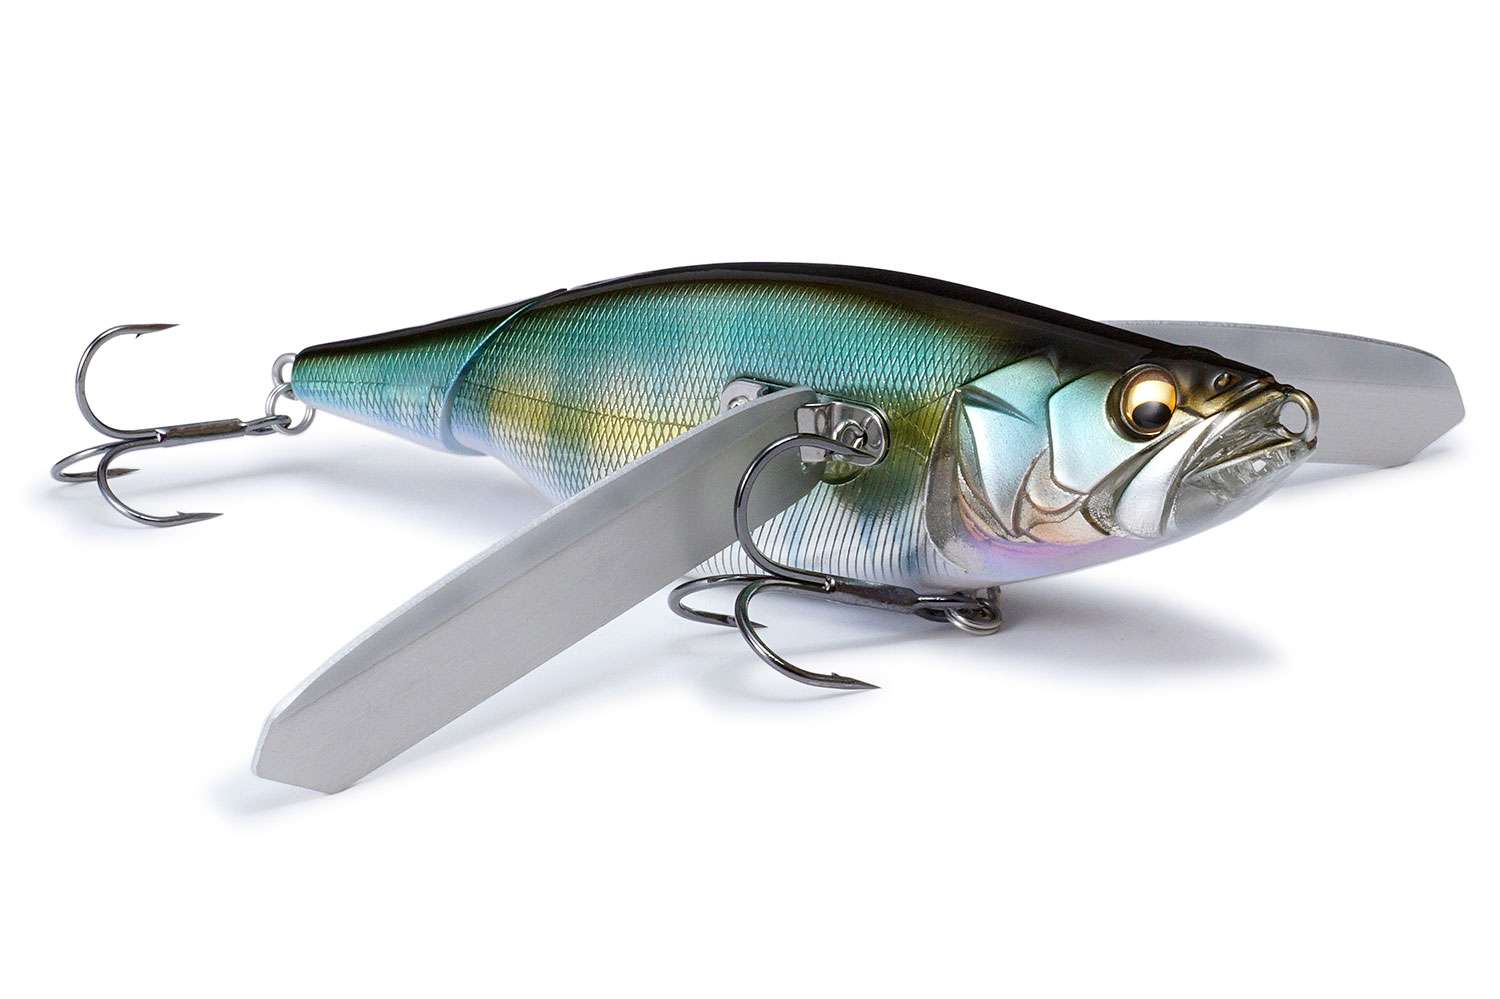   <b>Megabass i-Wing 135</b>
The result of hydrodynamic testing throughout Japan, the i-Wing features a jointed design, R.A.B. (Patent pending) pendulum-balancer, customizable duralumin wings, and Megabassâ fit and finish for a winged-meal like no other. During slow retrieves i-Wing generates micro pitch waves, evoking a small school of fish that swarms to weakened bait. However, the lure shines when you kick your retrieve into high gear, taking off with a buzzing-crawl that outpaces the competition and calls up fearsome topwater eruptions. This wide retrieve range is powered not only by wing size, placement and hydrodynamic design, but by advances like the patent-pending R.A.B. balancer, which anchors the i-Wingâs crawling action by acting as a counterweight. It measures 5.3 inches and weighs 8 ounces.<BR>

<B>MSRP: $59.99</B>